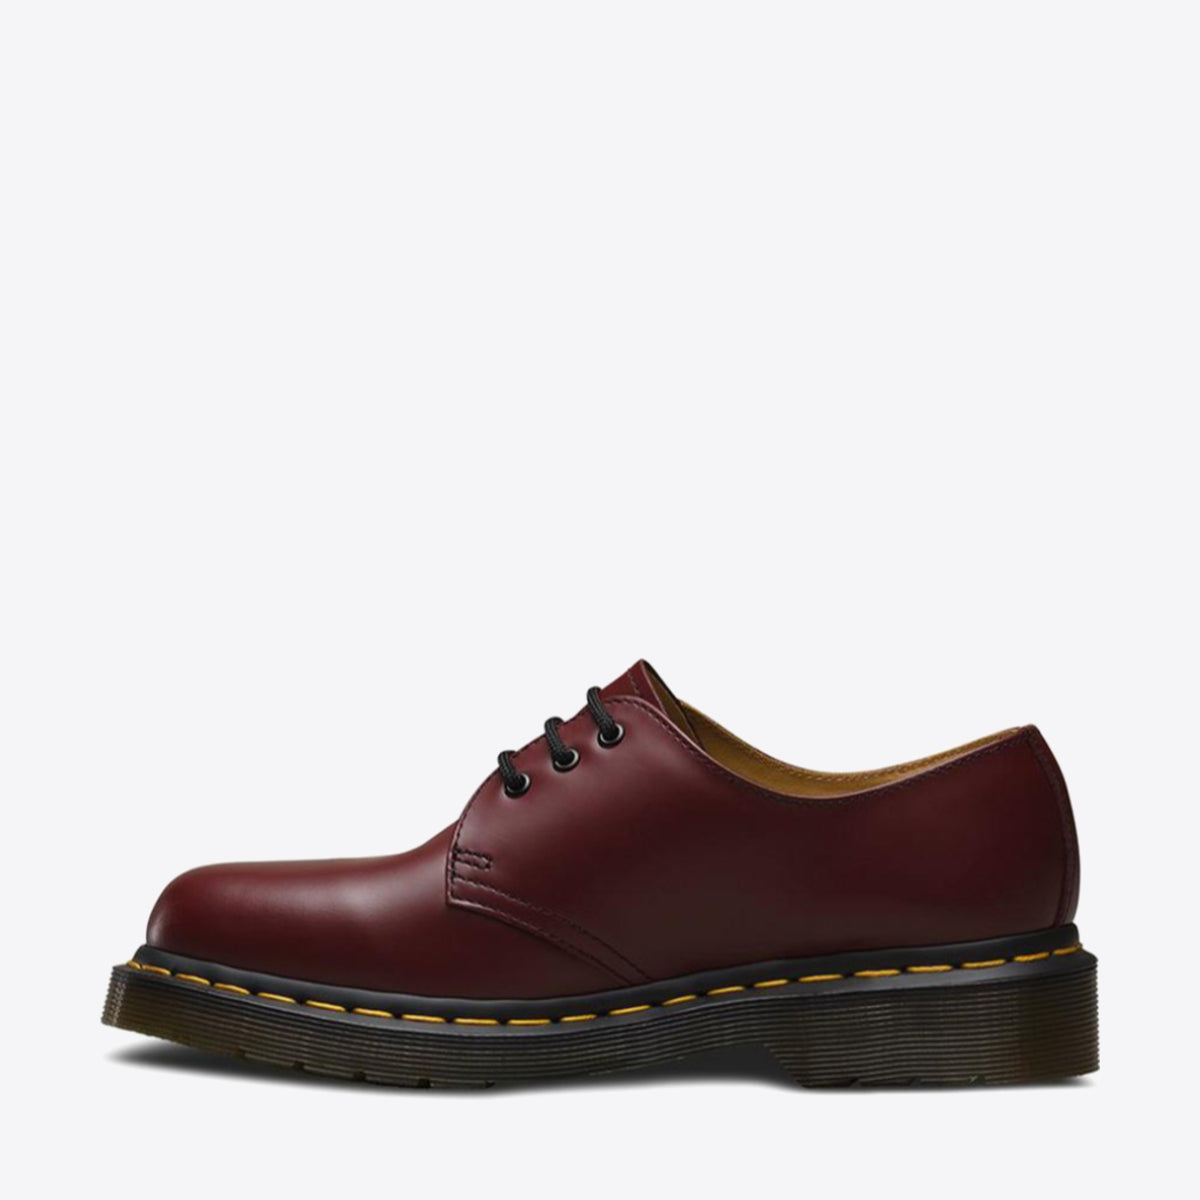 DR MARTENS 1461 Smooth 3 Eye Shoe Cherry Red - Image 6